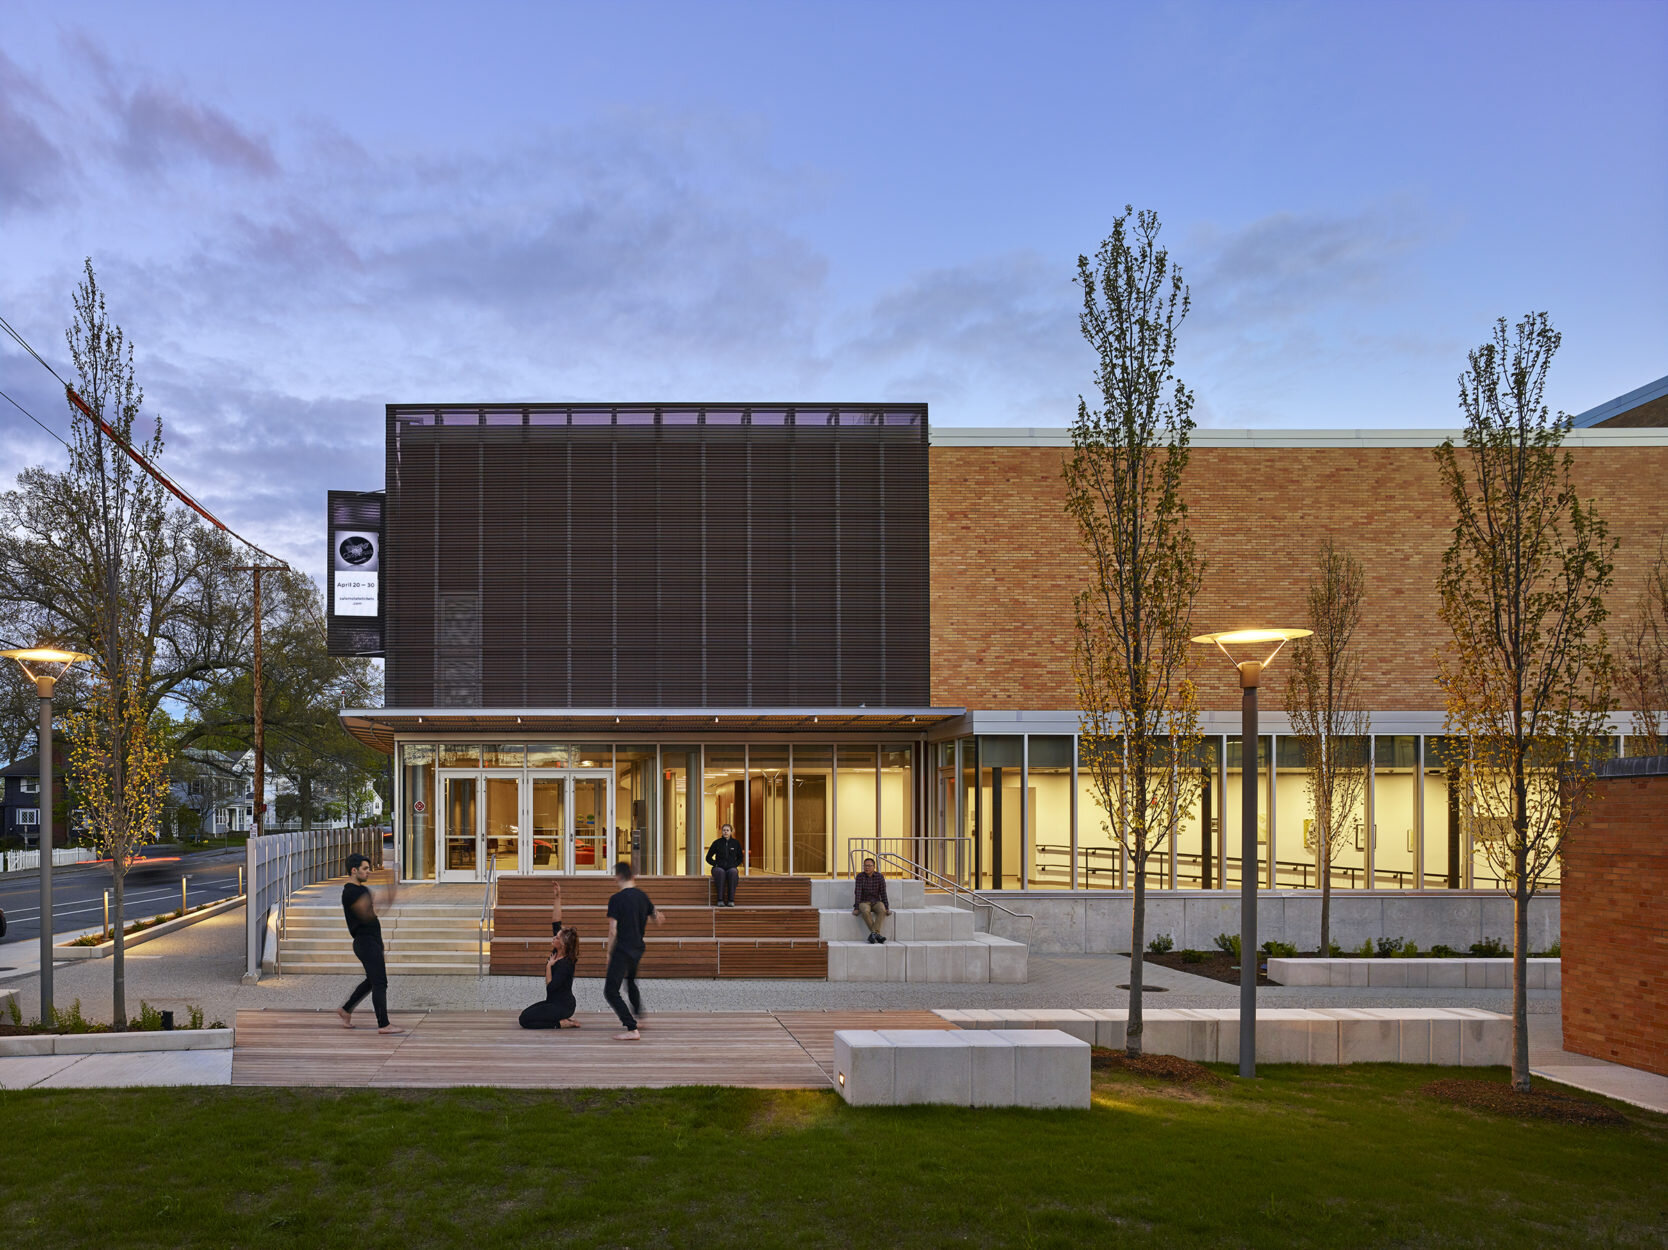  Salem State University Performing Arts Complex, Sophia Gordon Center for Creative and Performing Arts; Leers Weinzapfel Architects 